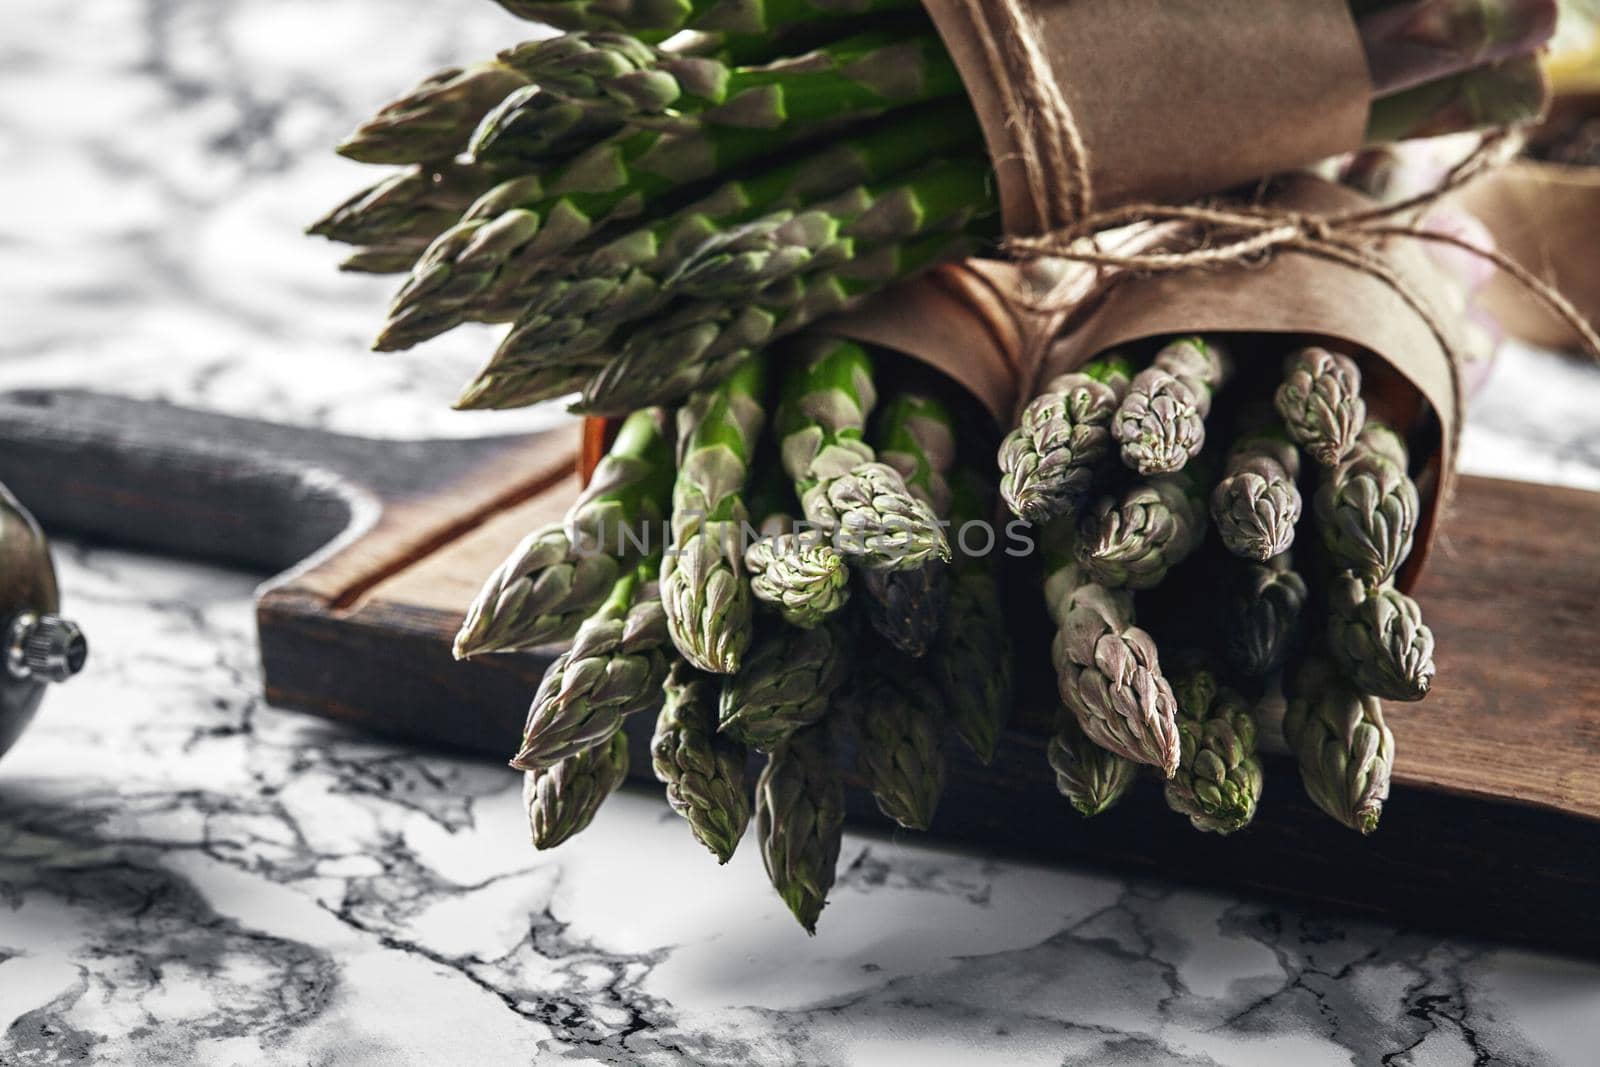 Bunch of an edible, ripe sprigs of asparagus on a wooden board, marble background. Fresh, green vegetables. Healthy eating. Spring harvest, agricultural farming concept.